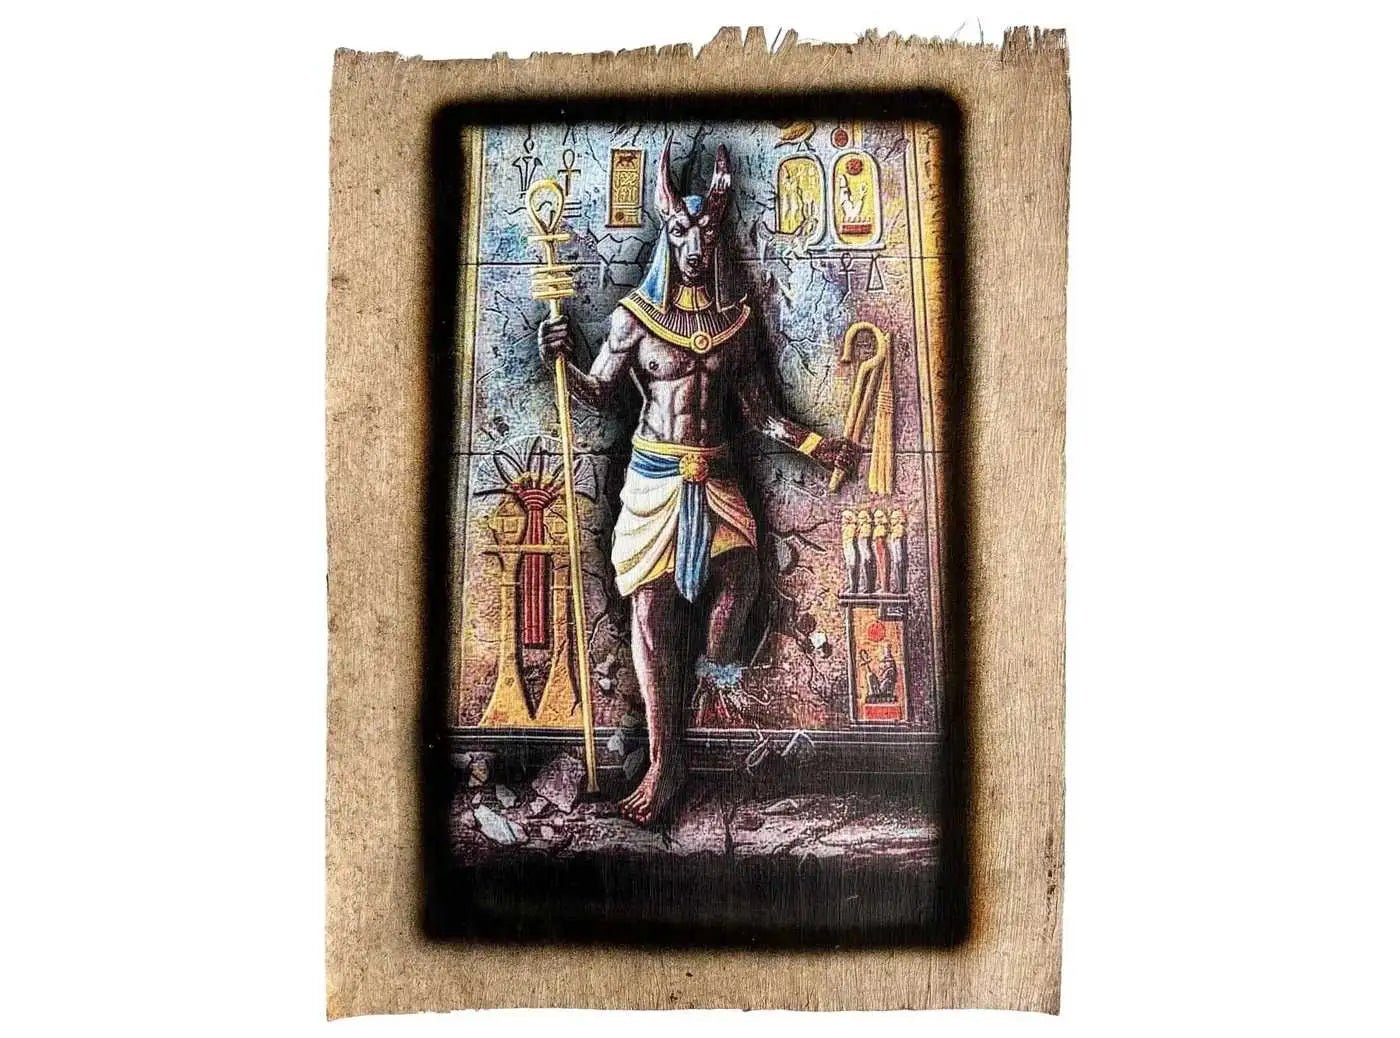 Egypt Papyrus - Anubis Guardian of The Underworld - Wall Decor Ancient Egyptian Egyptian god of death